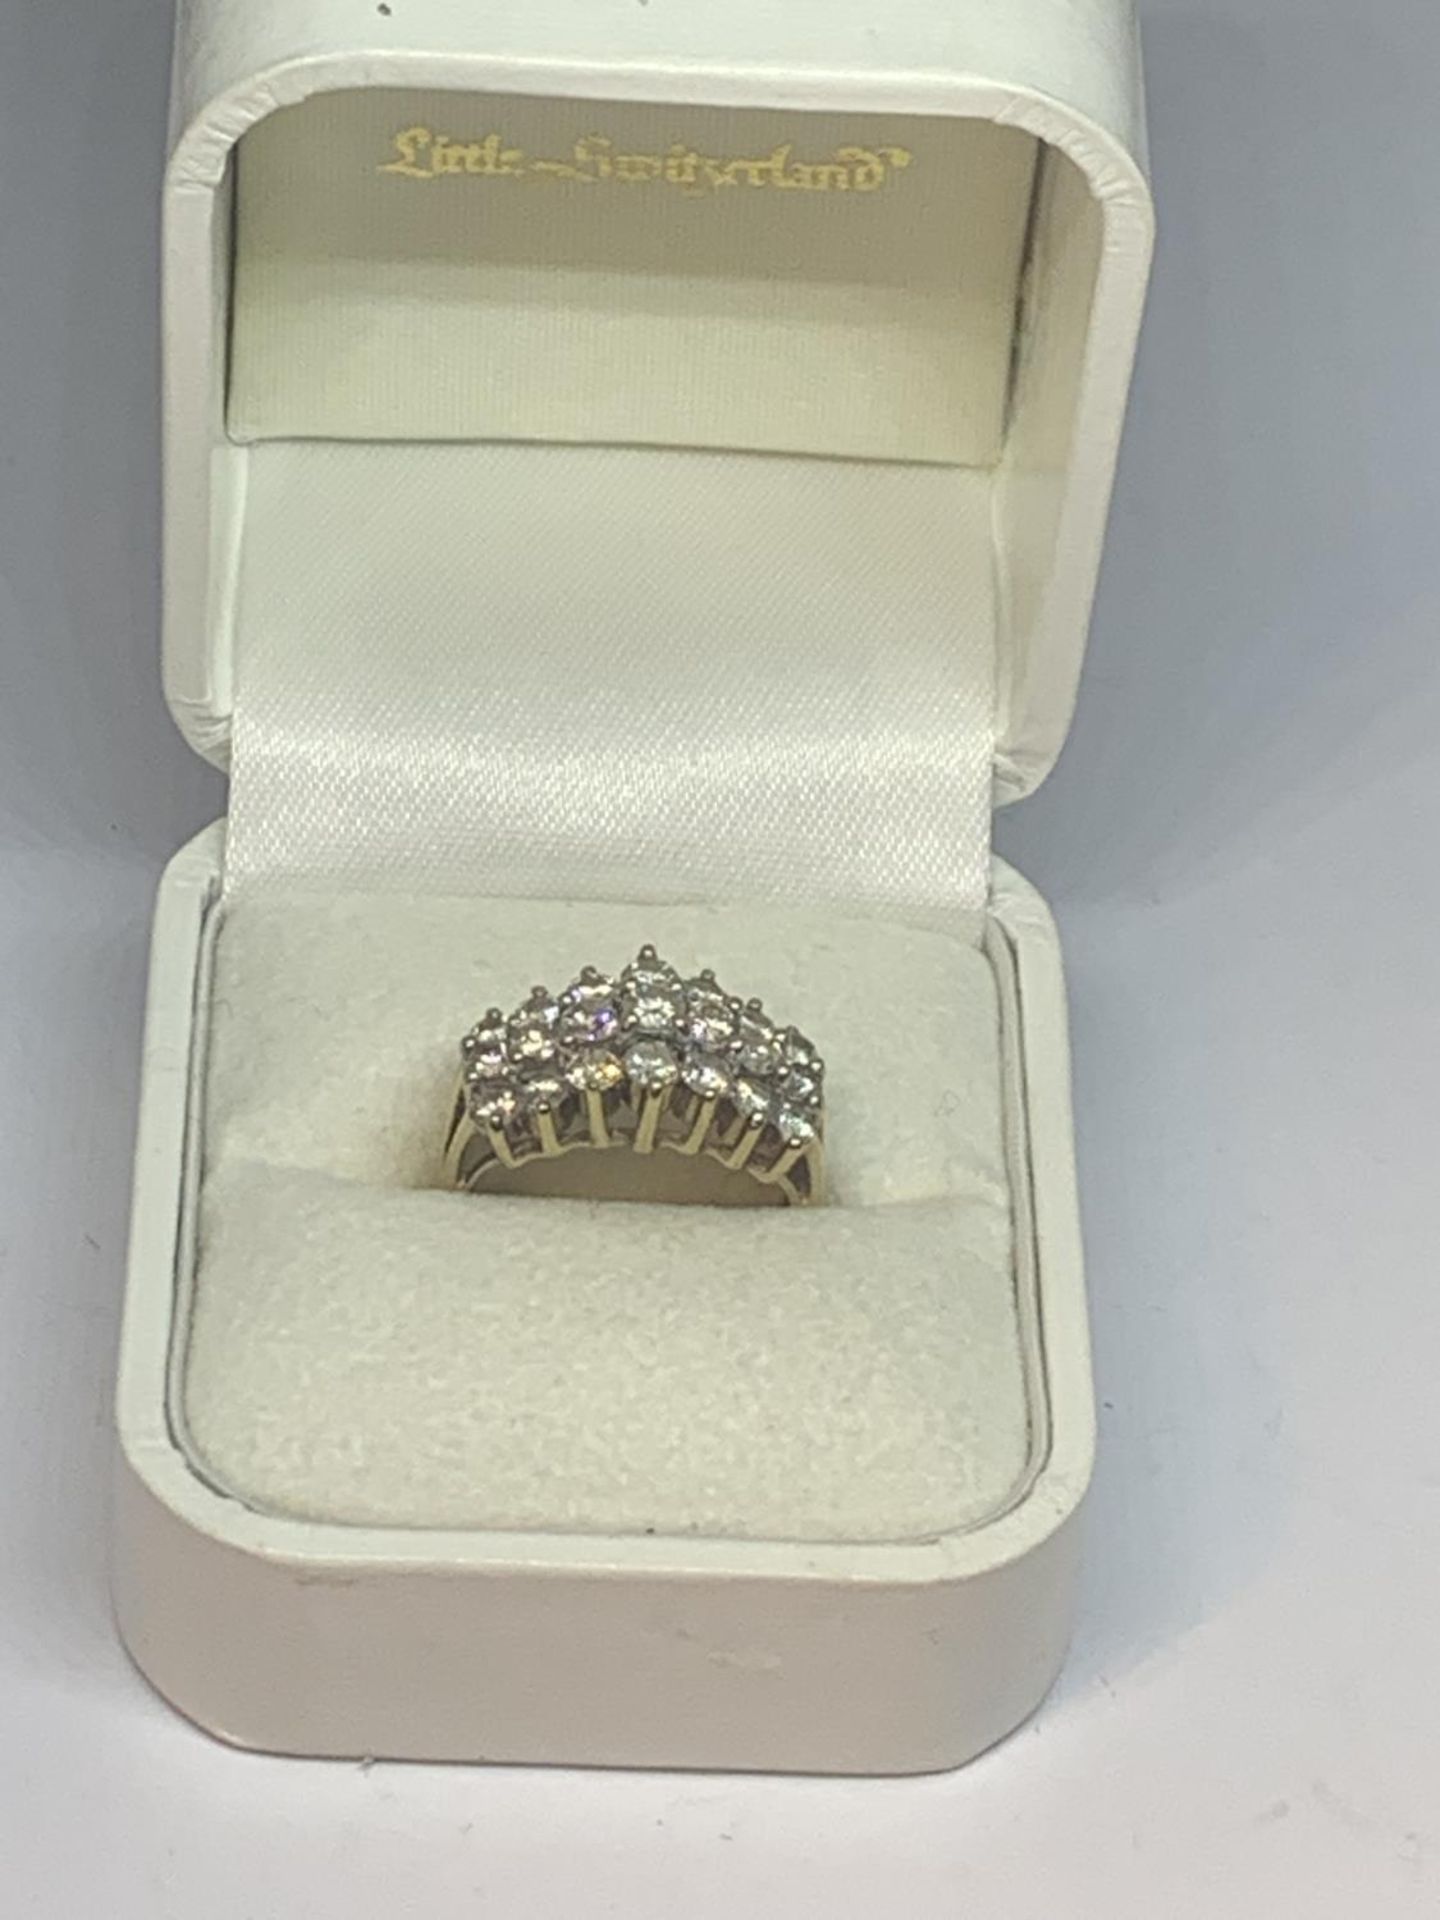 A 9 CARAT GOLD RING WITH 1.5 CARAT MADE UP OF 21 DIAMONDS SIZE N IN A PRESENTATION BOX - Image 5 of 5